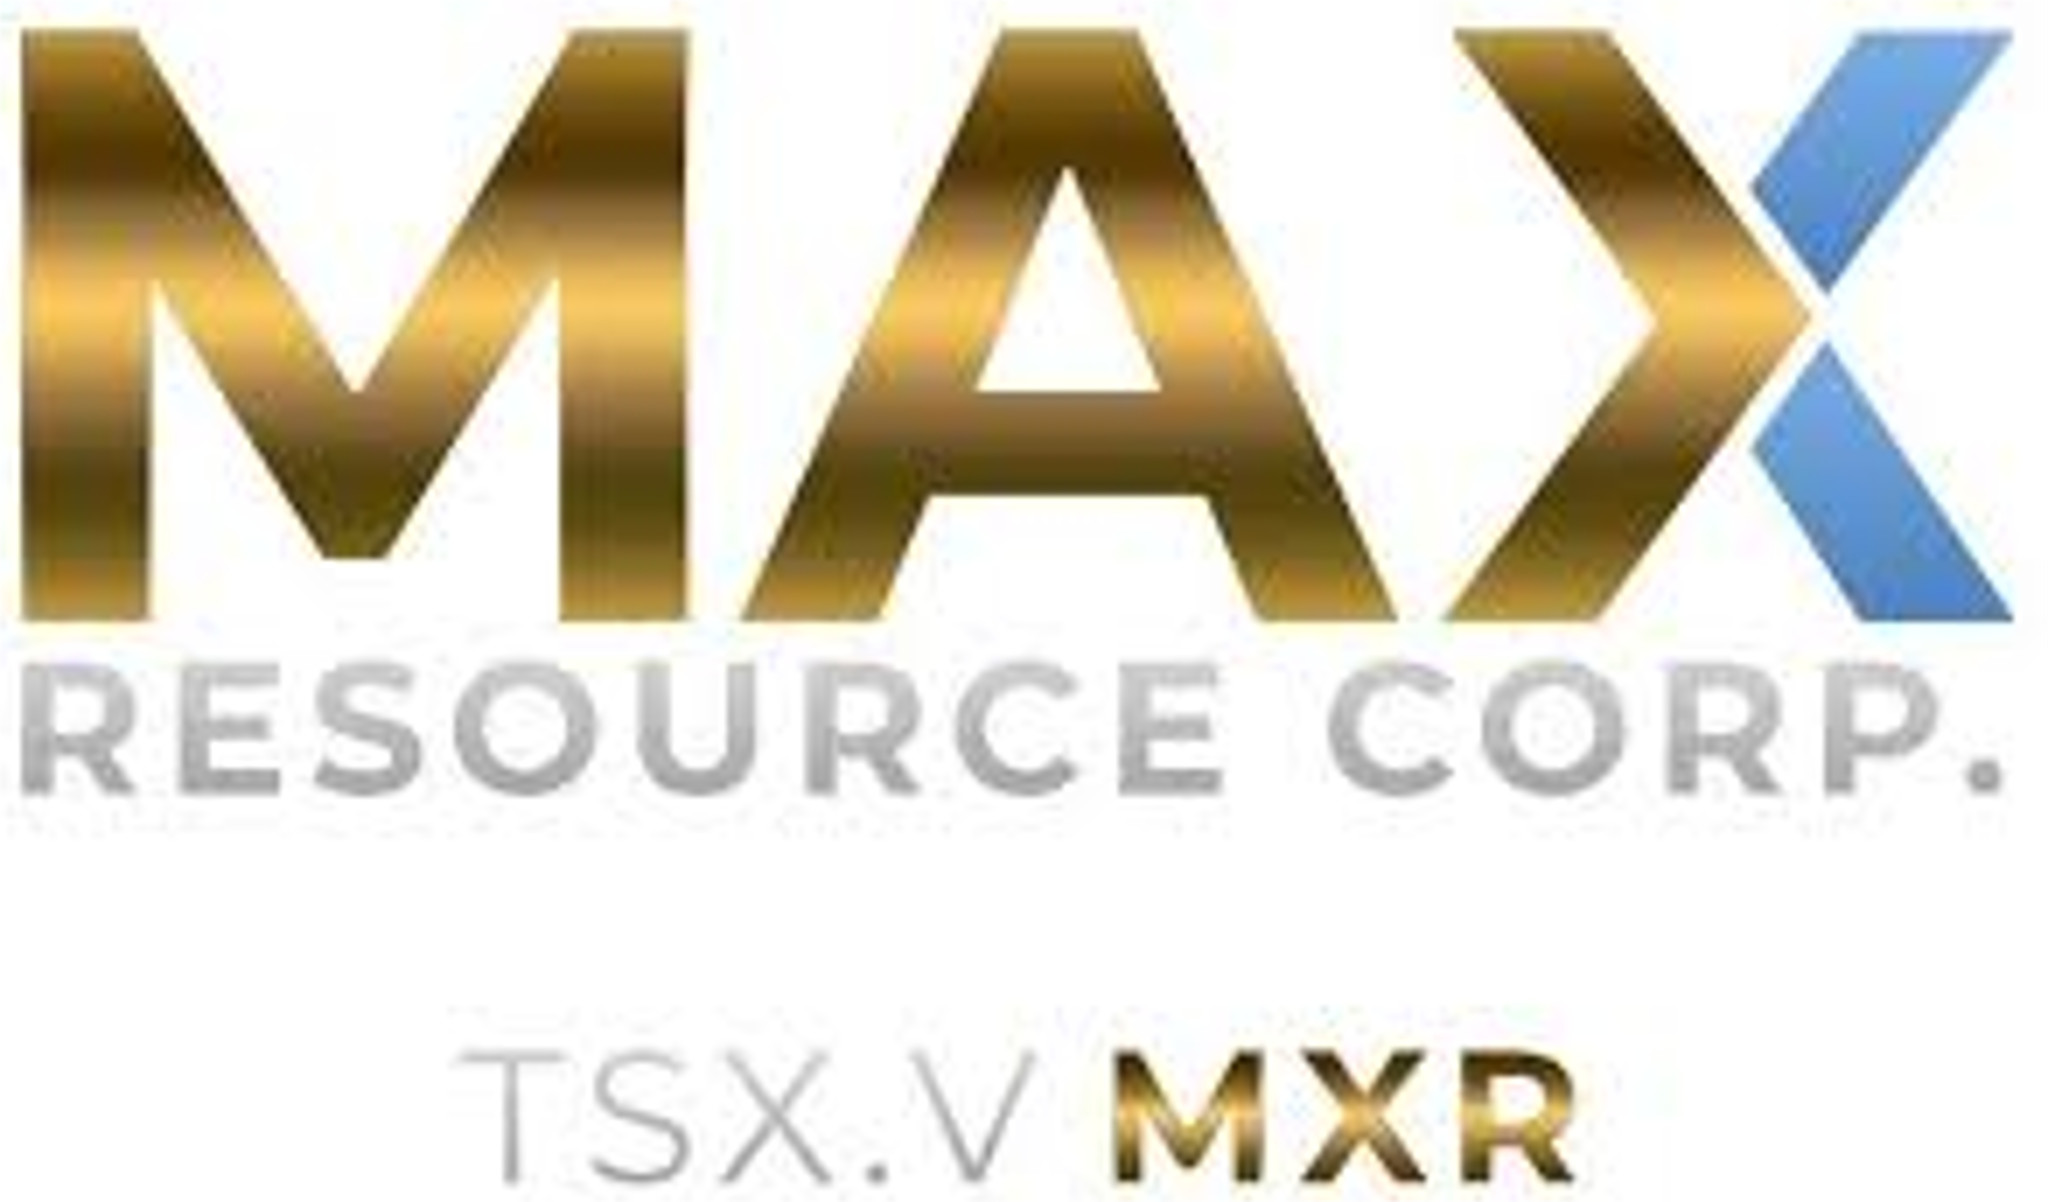 Max Resource Corp is a client of Natrinova Capital Inc.